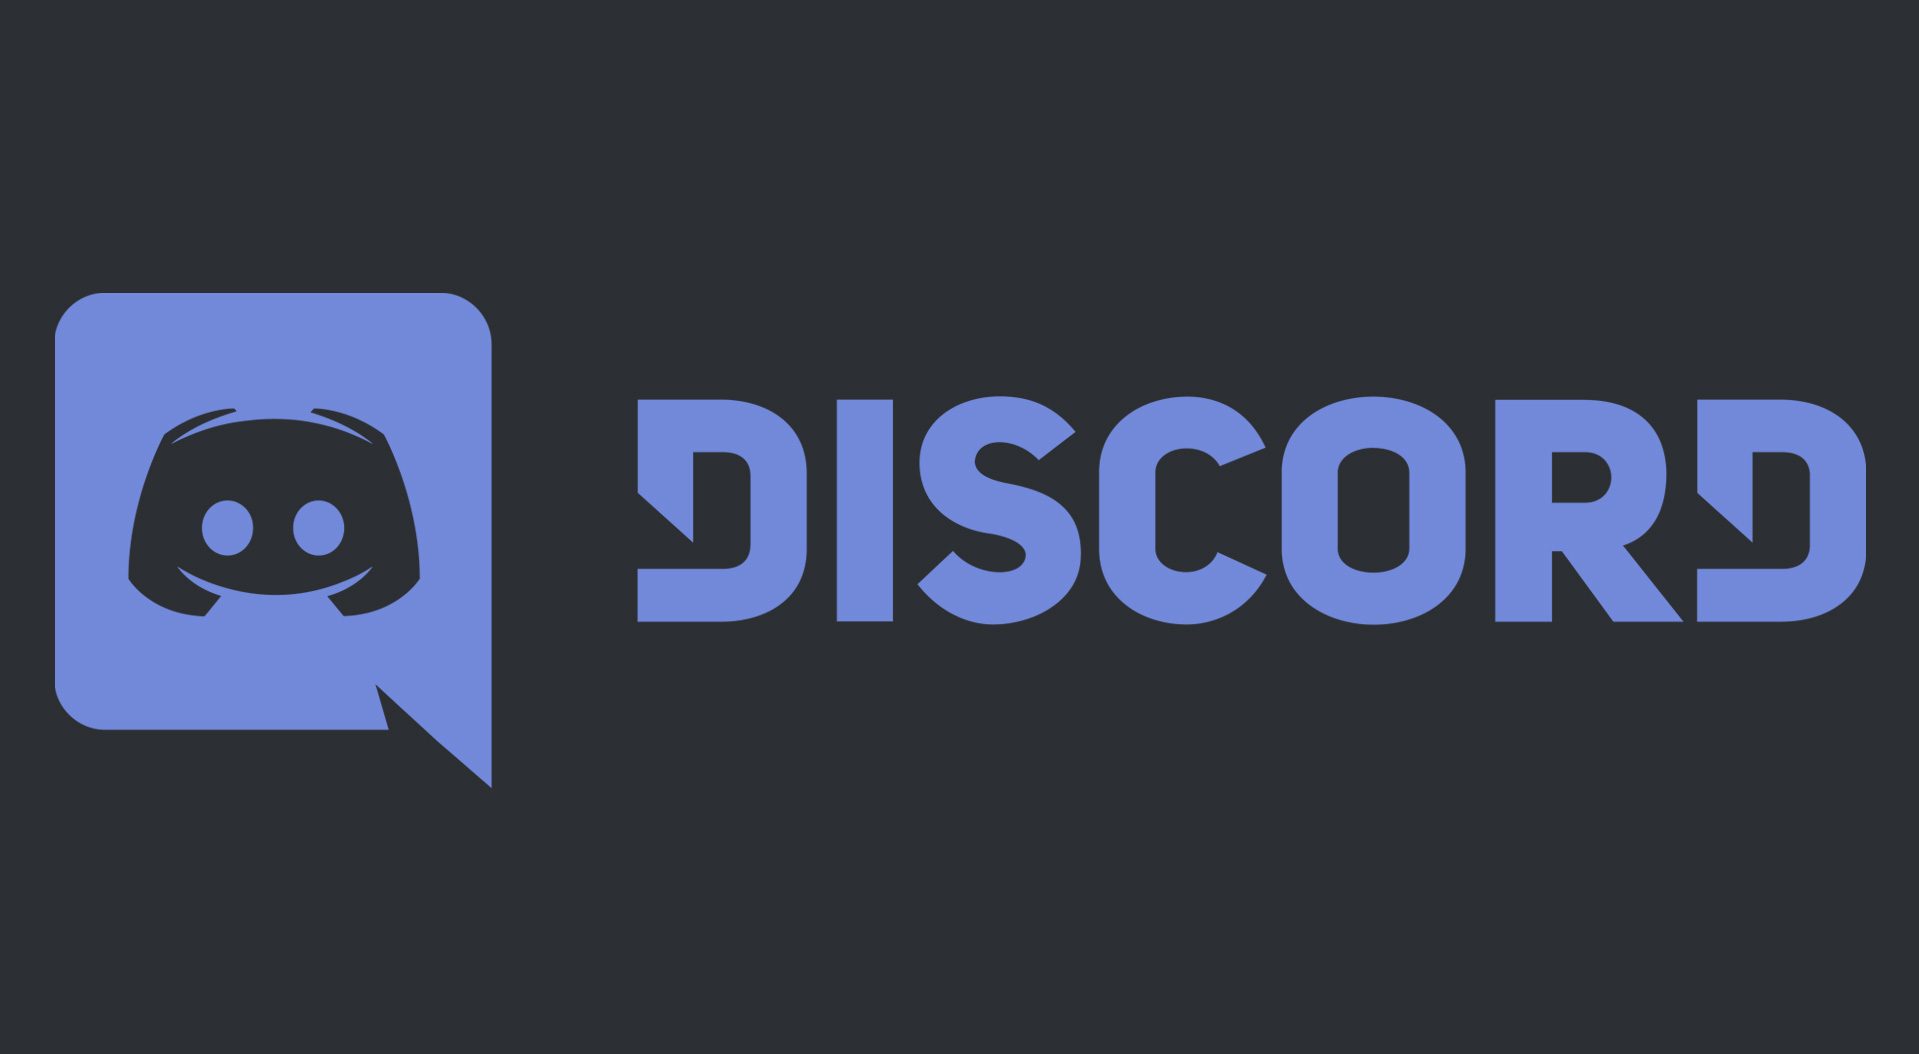 Discord and PlayStation® Network Connection FAQ – Discord